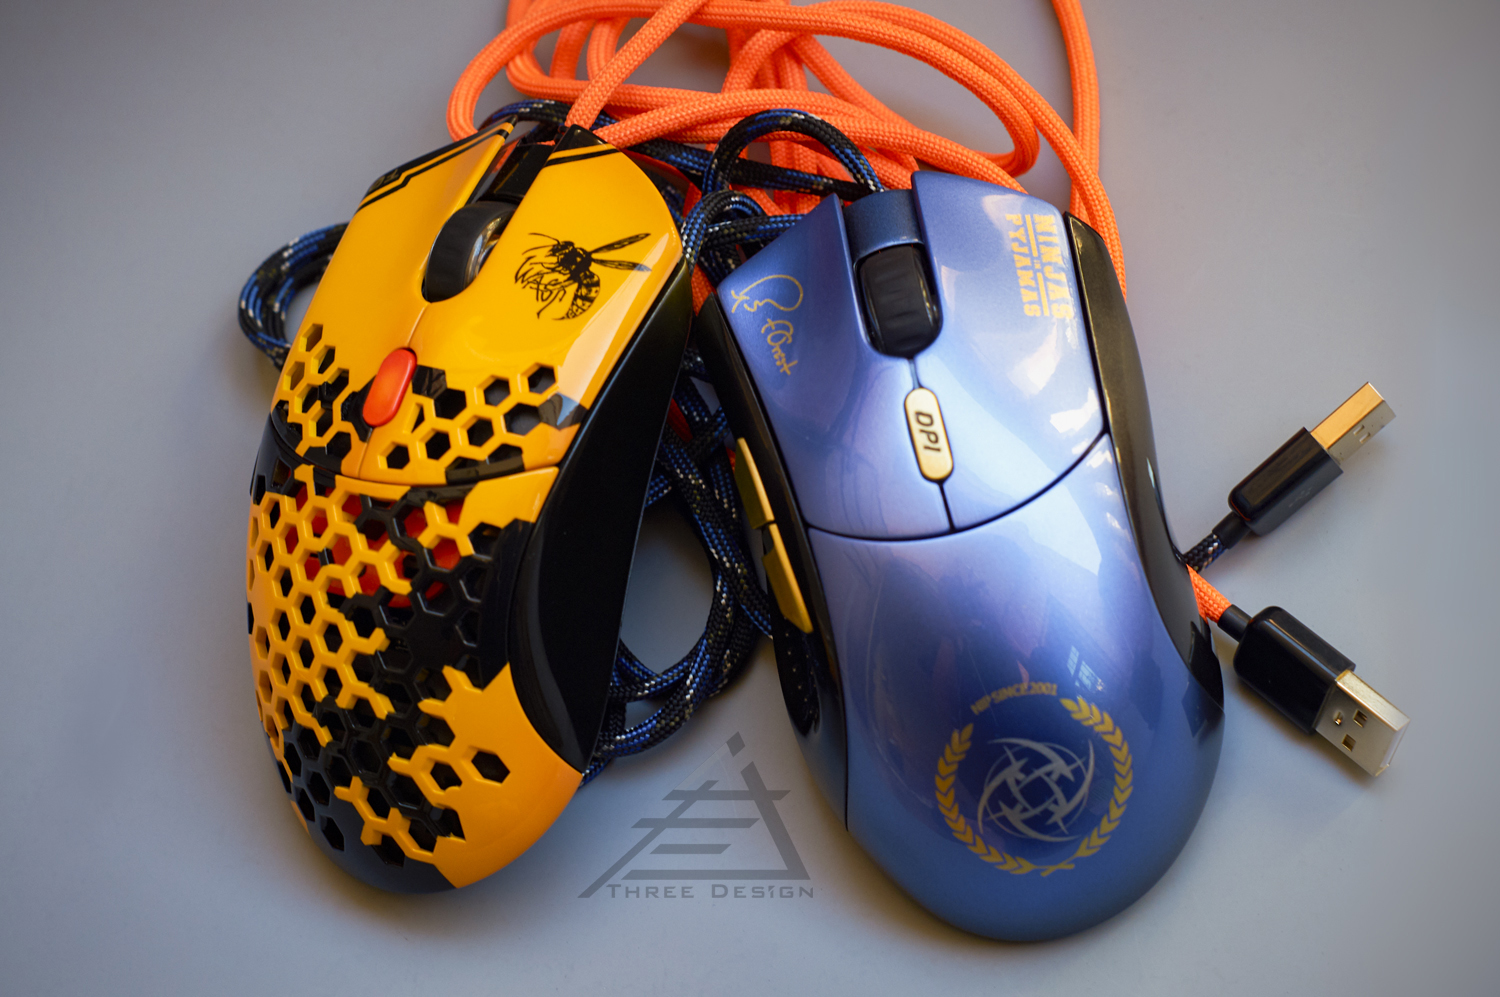 Finalmouse Classic Ergo 2 Zfrontier 装备前线